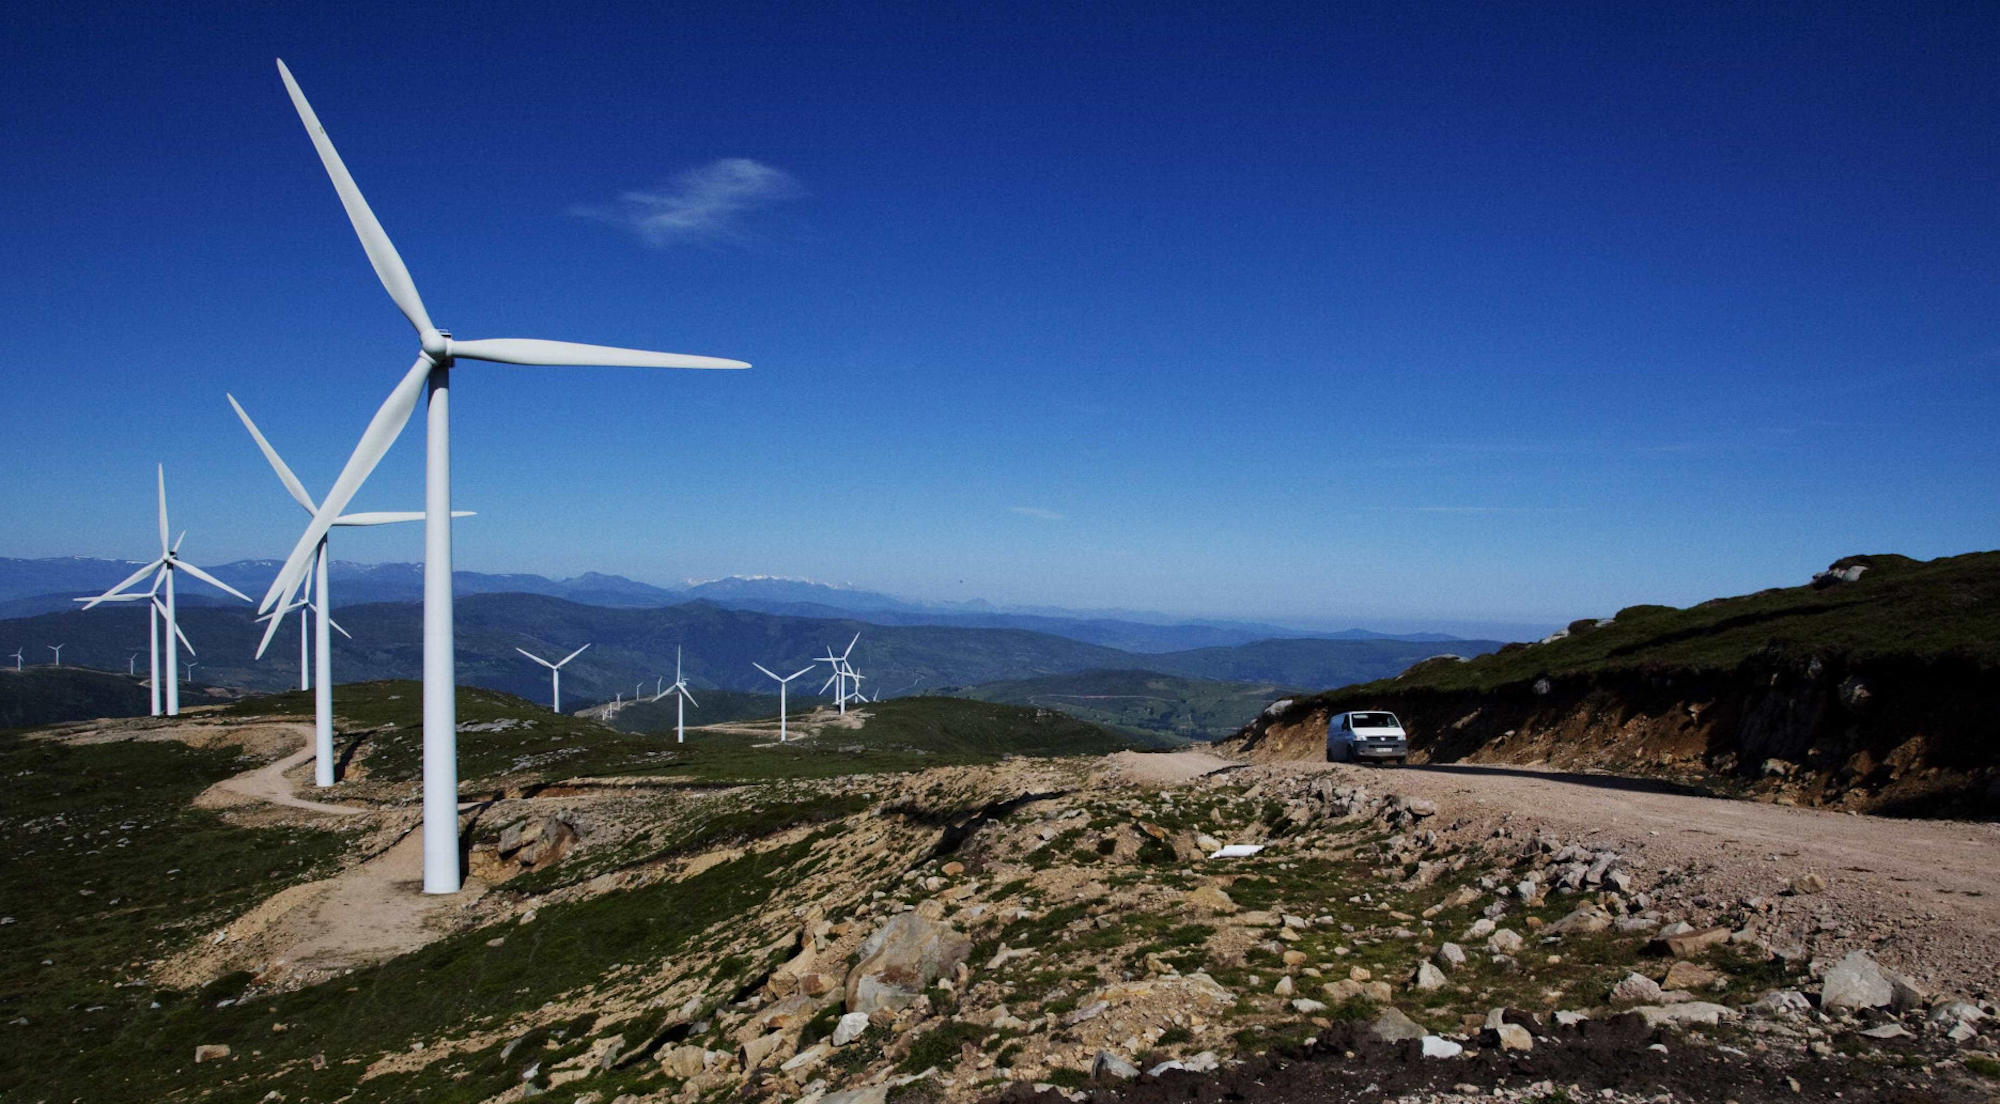 The world’s largest wind tower maker is making major investments in Portugal